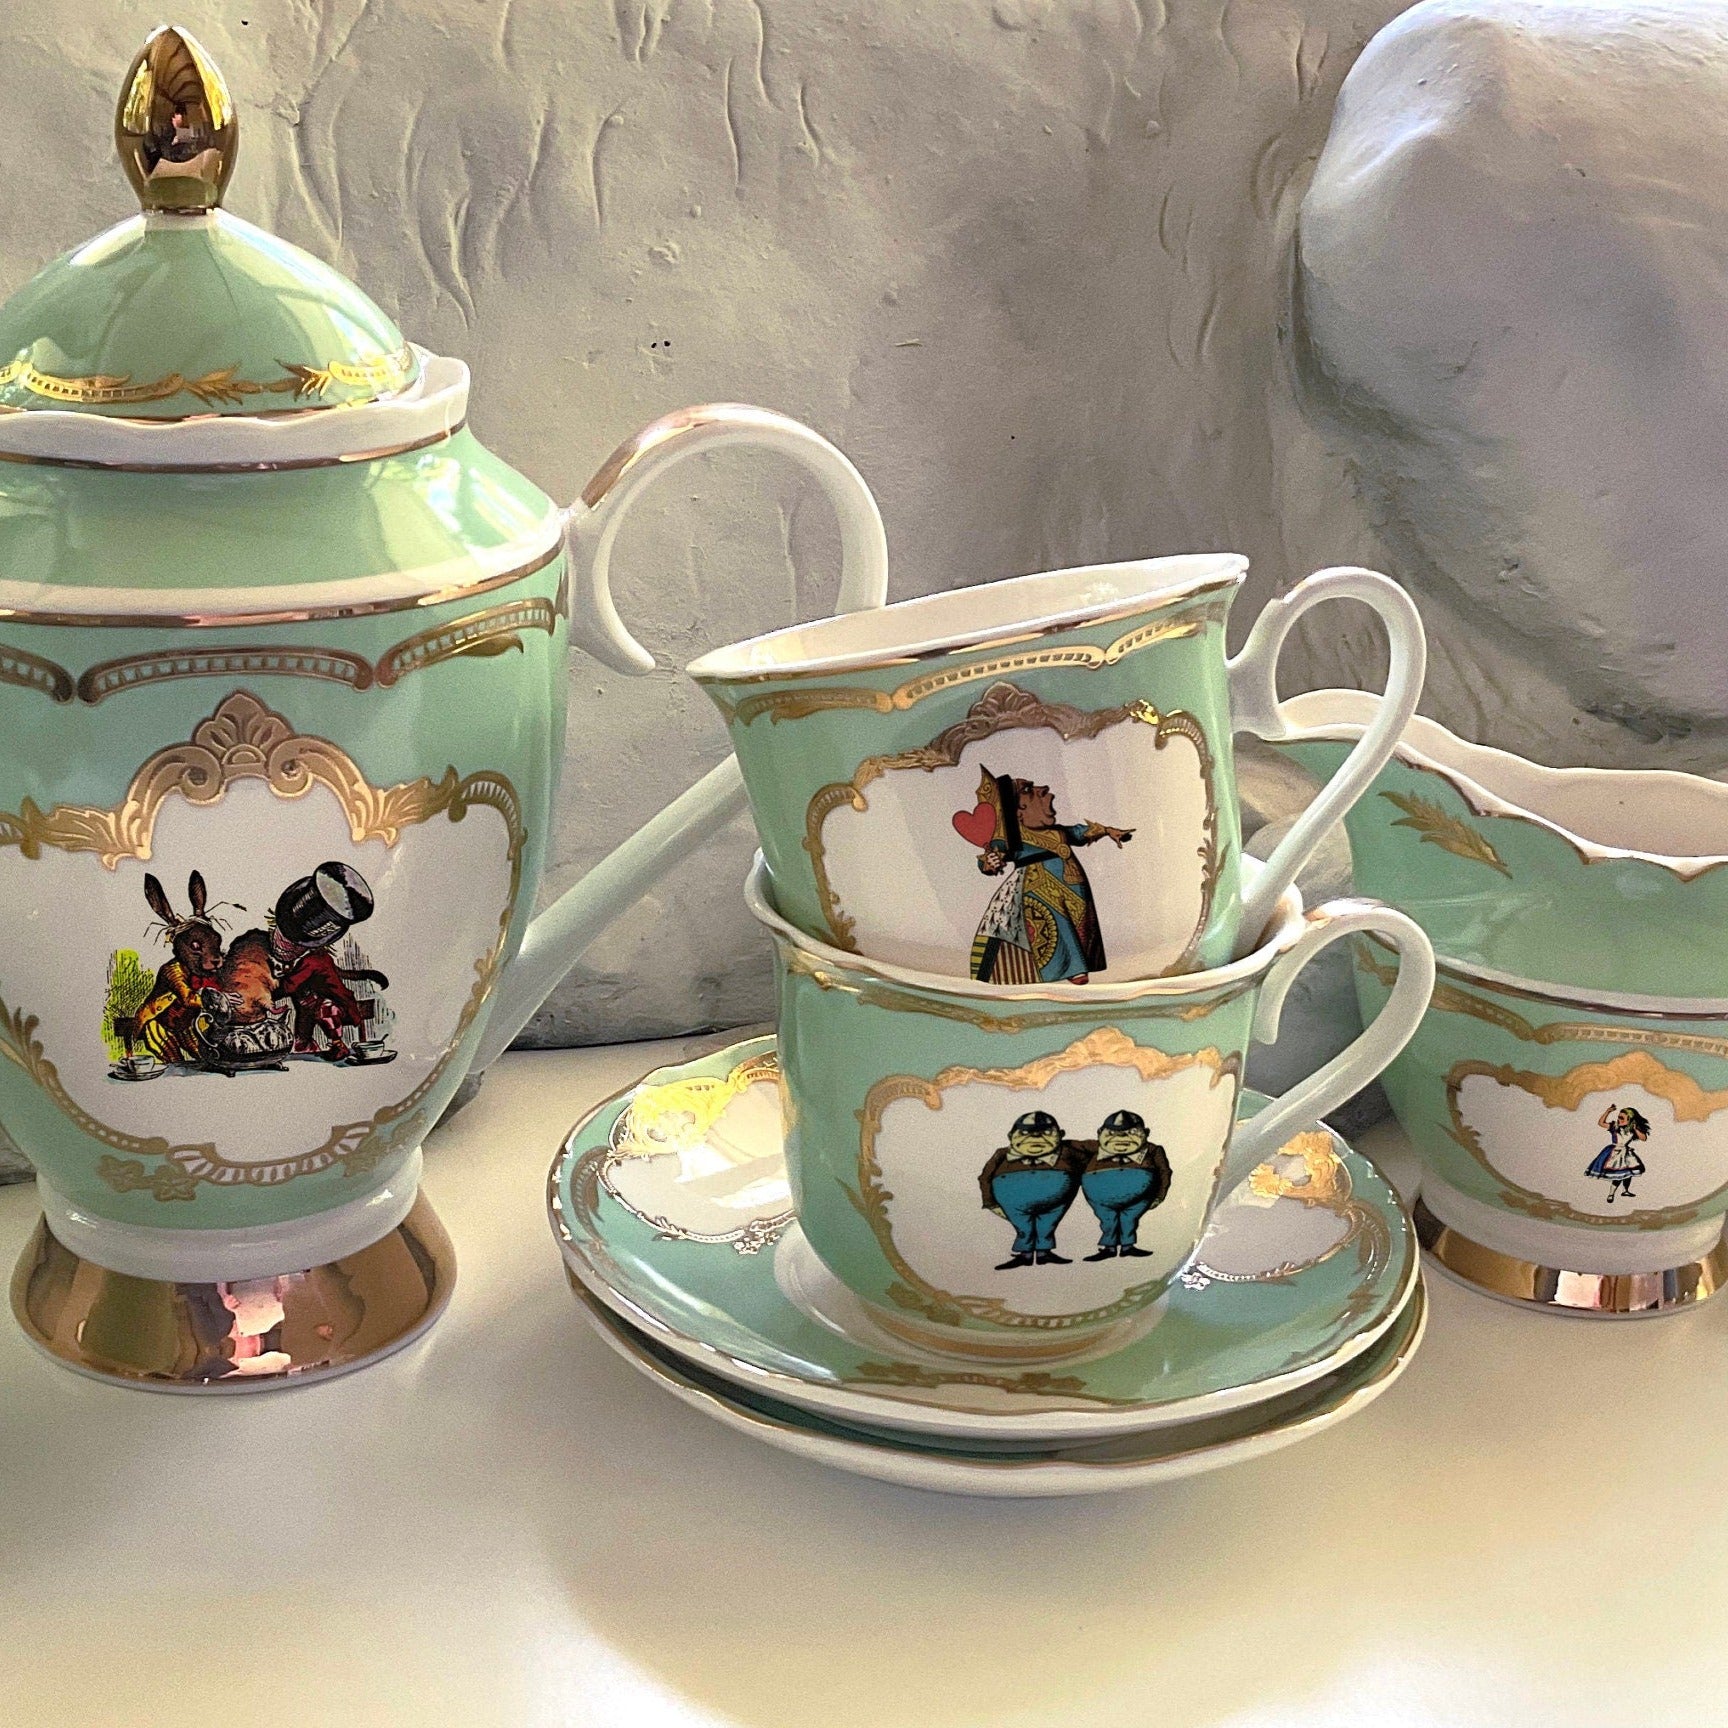 8 Piece Kitchen Set with Alice in Wonderland Custom Etchings by